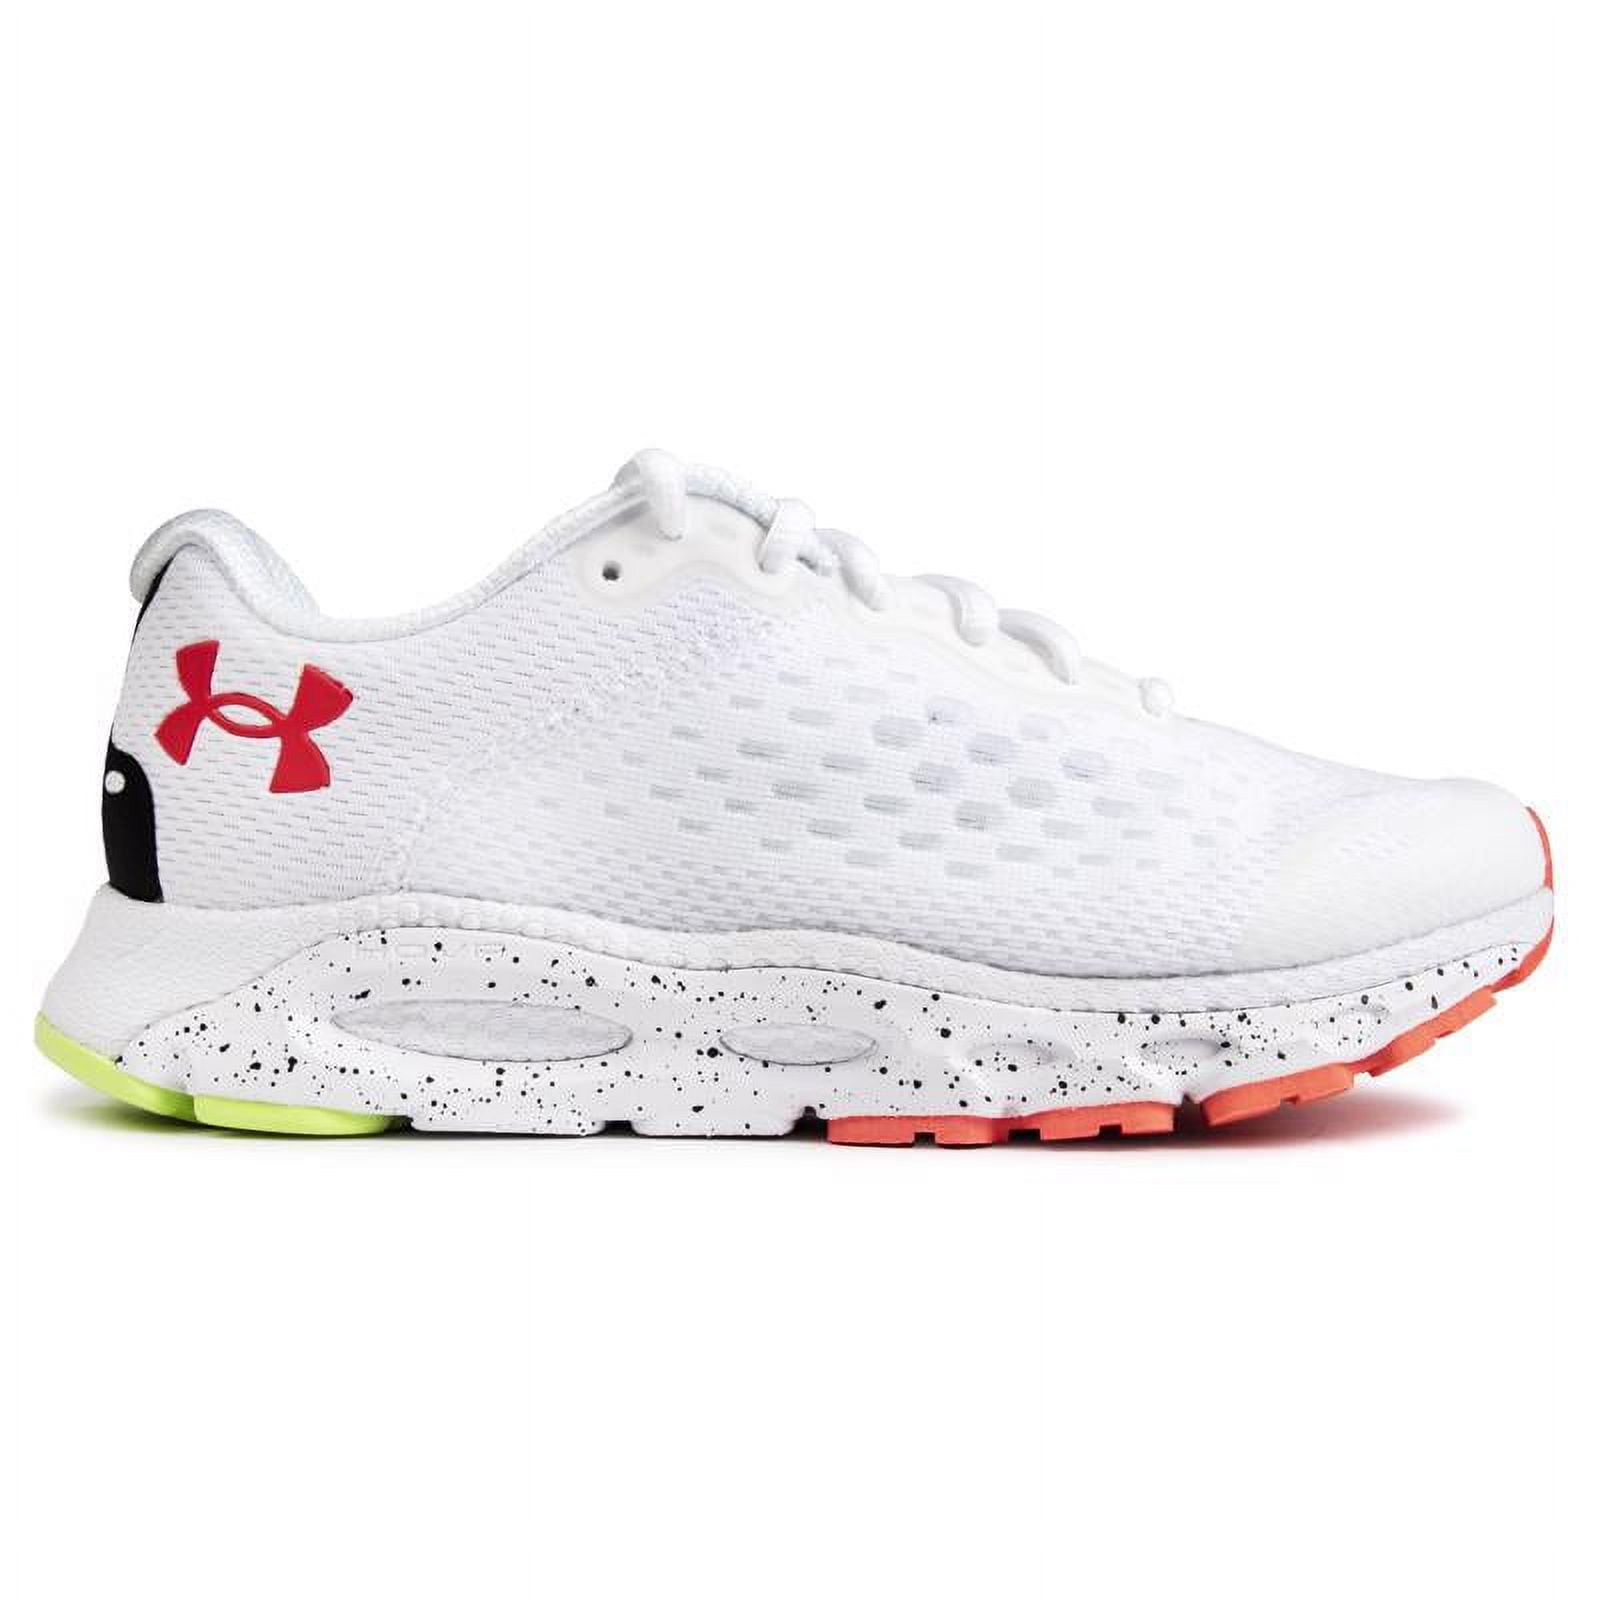 Under Armour Hovr Infinite 3 Hs Sneakers 